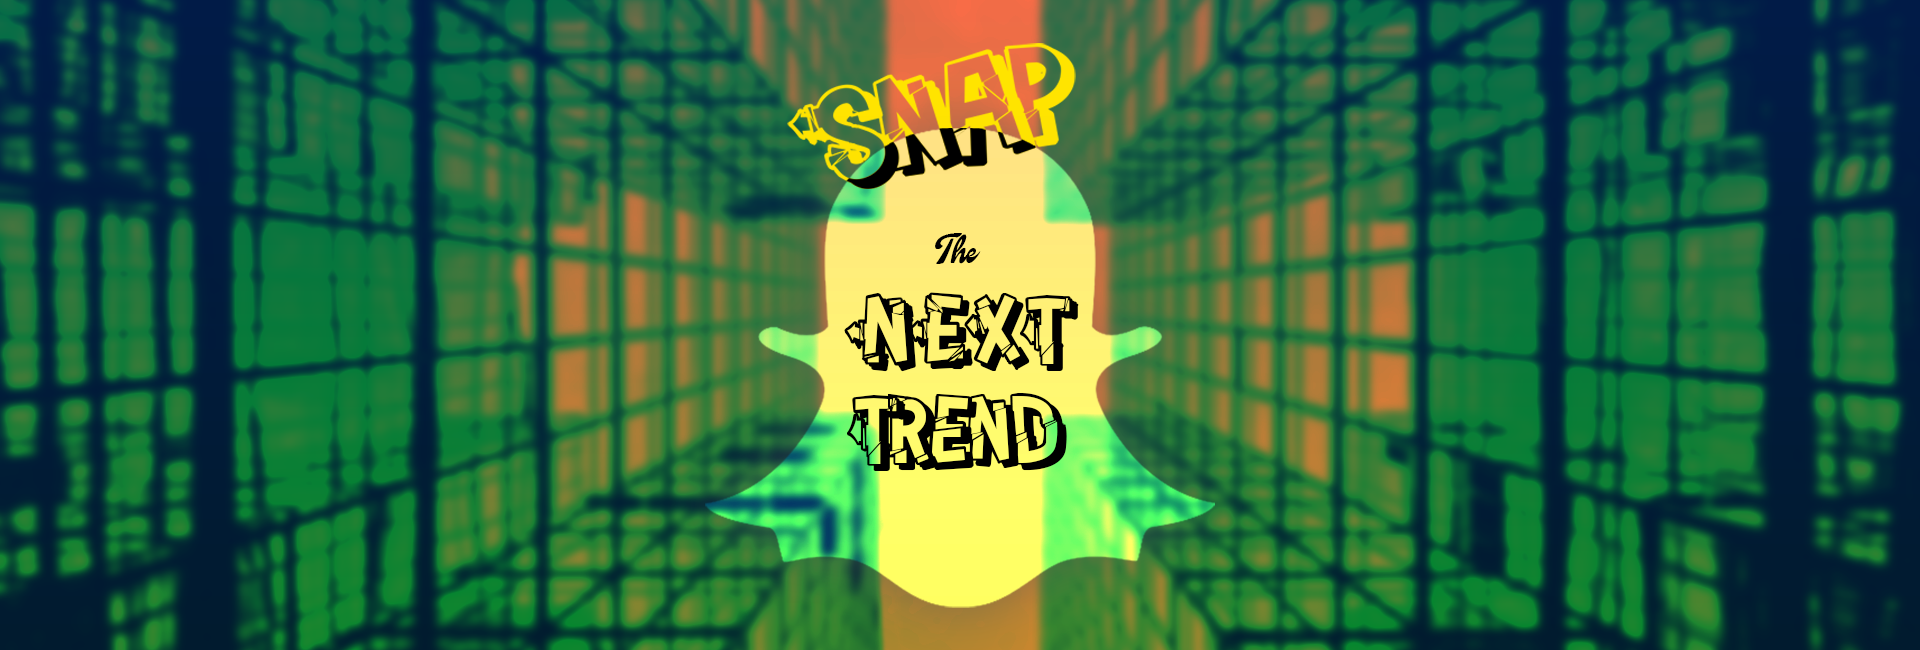 Snapchat Digital Marketing to Capture the Next Trend